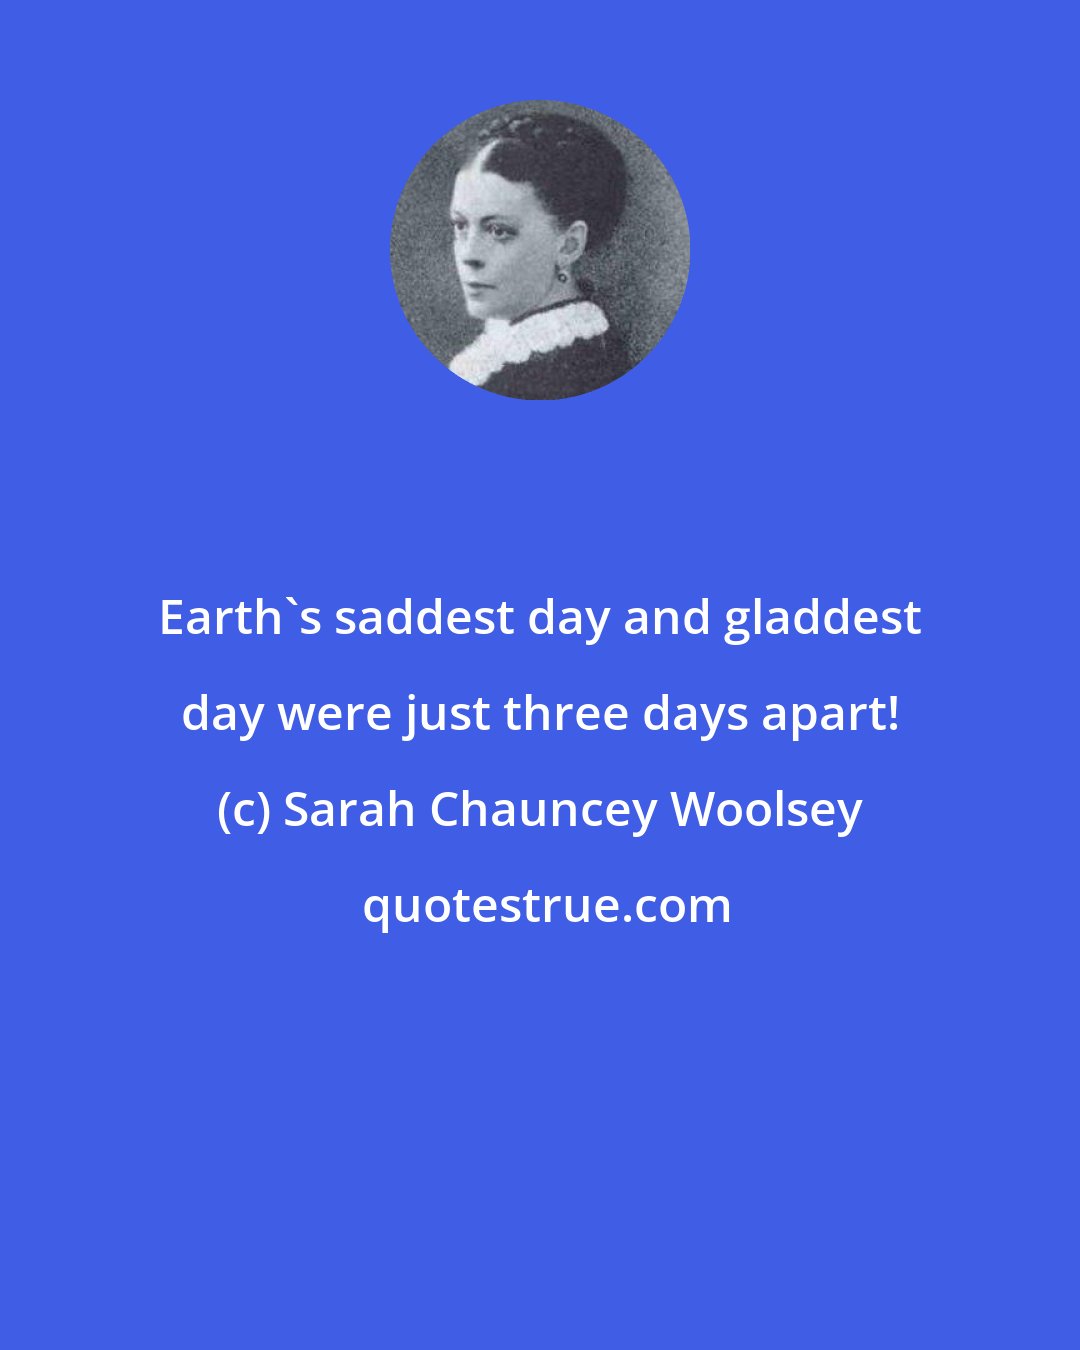 Sarah Chauncey Woolsey: Earth's saddest day and gladdest day were just three days apart!